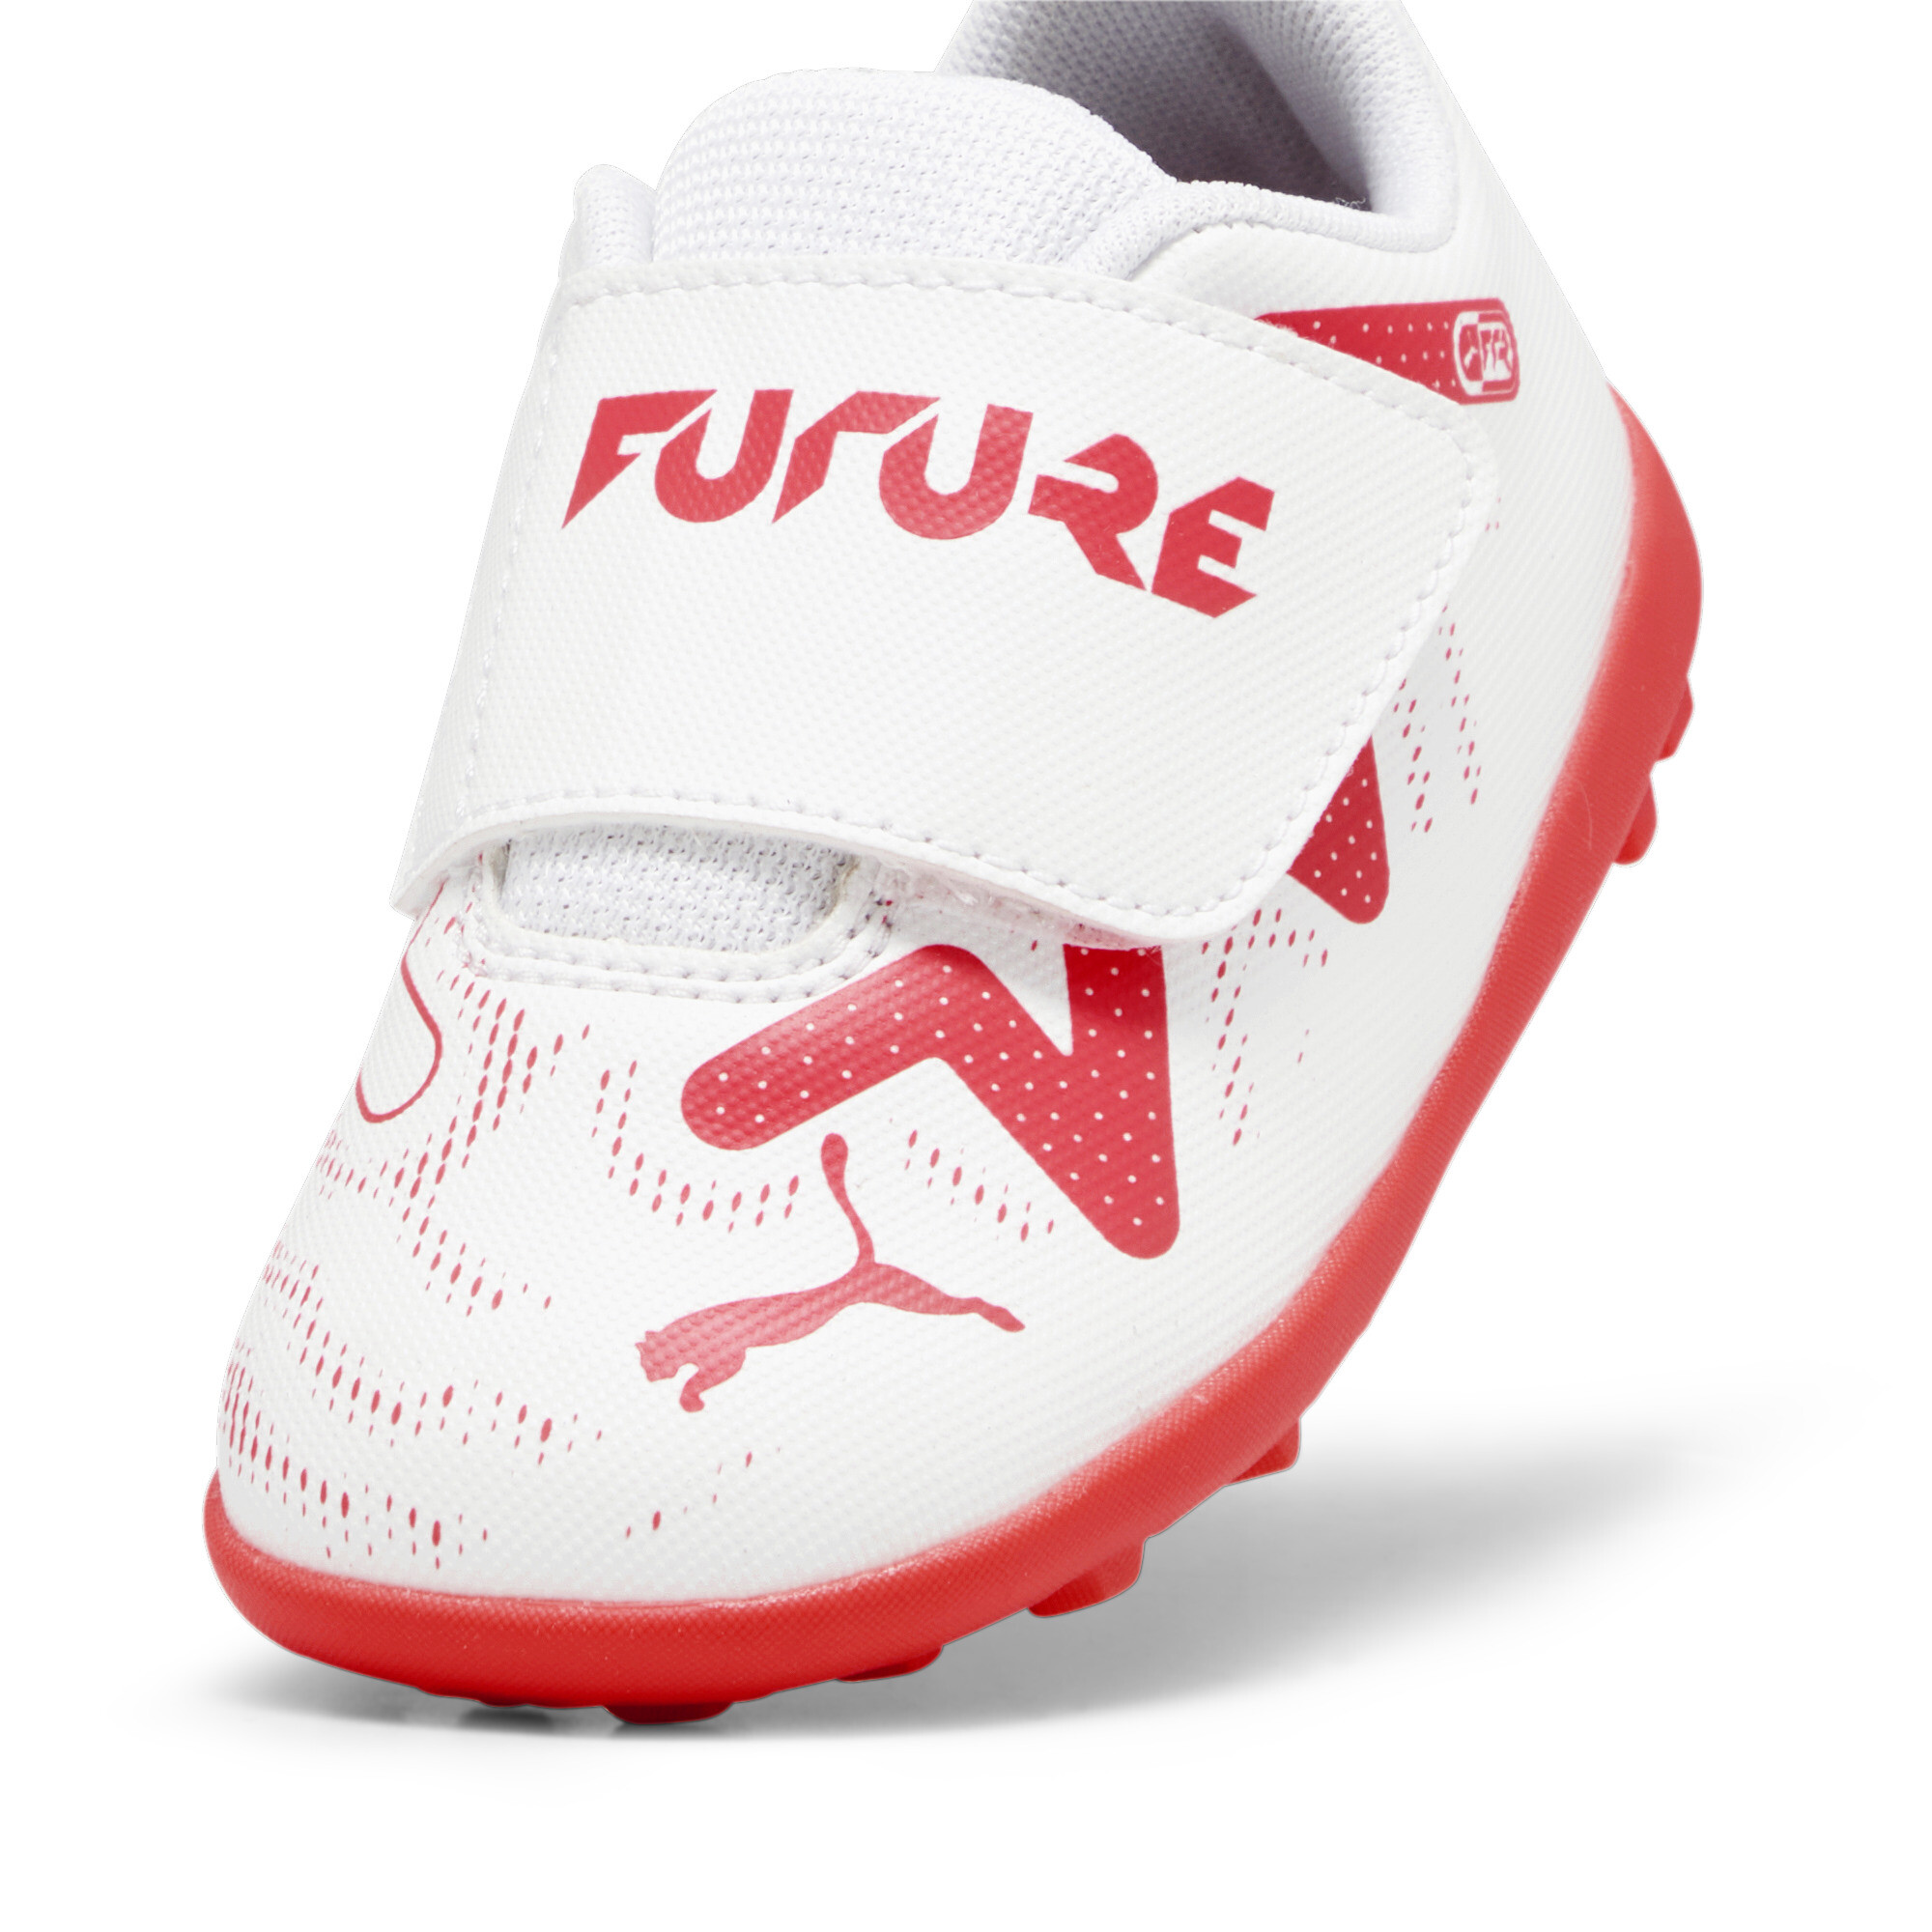 Kids' PUMA FUTURE PLAY TT Toddlers' Football Boots In White, Size EU 24